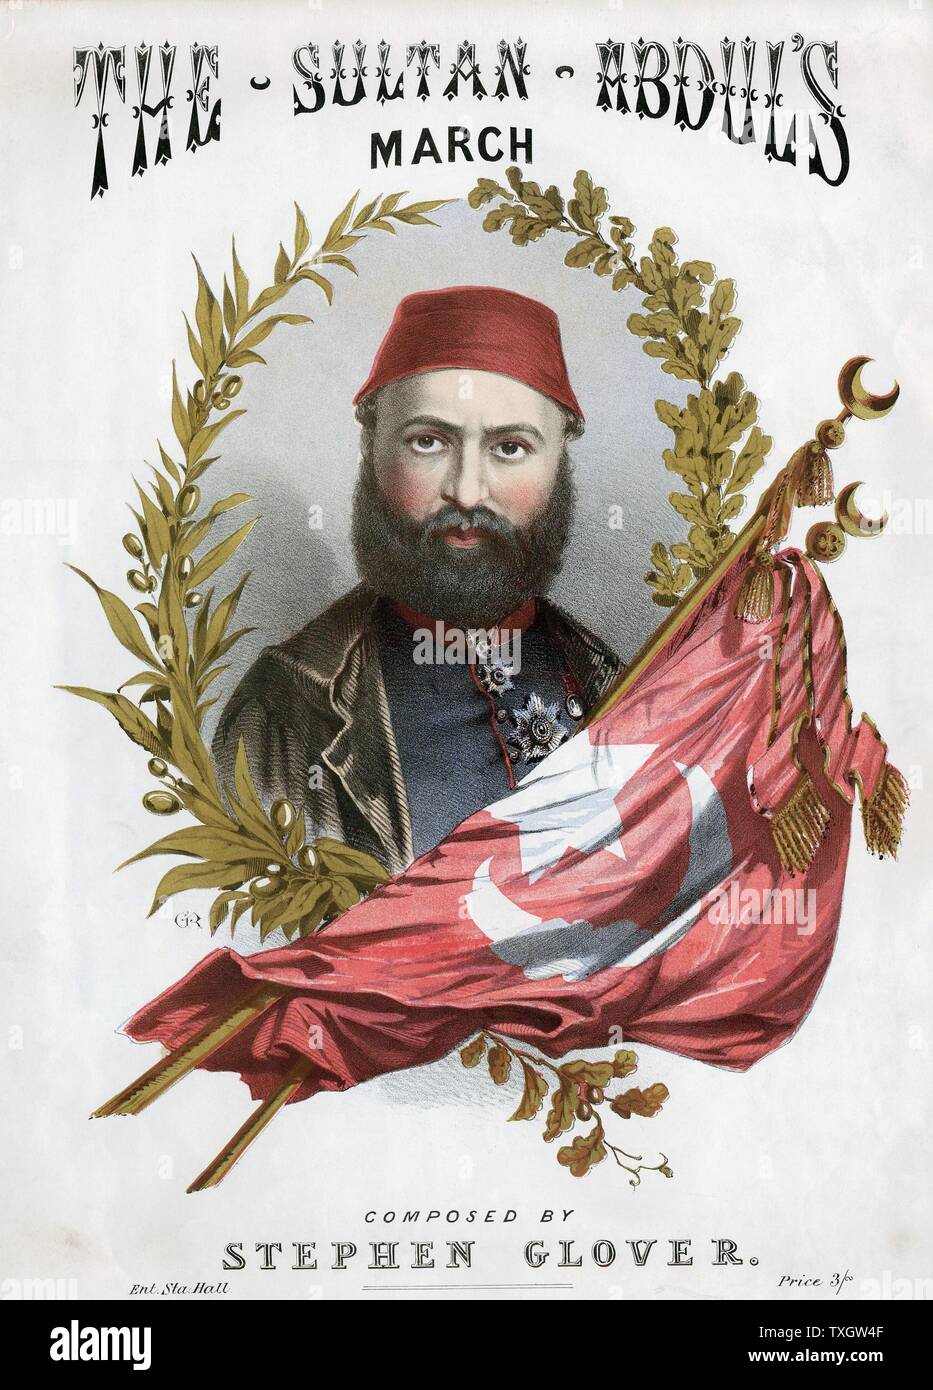 Abd-ul-Aziz (1830-1876), Sultan of Turkey from 1861 At first liberal and westernising, became autocratic. Forced to abdicate after risings in Bosnia, Bulgaria and Herzegovina.  Coloured lithograph from cover of sheet music published c1871 when he visited Europe Stock Photo